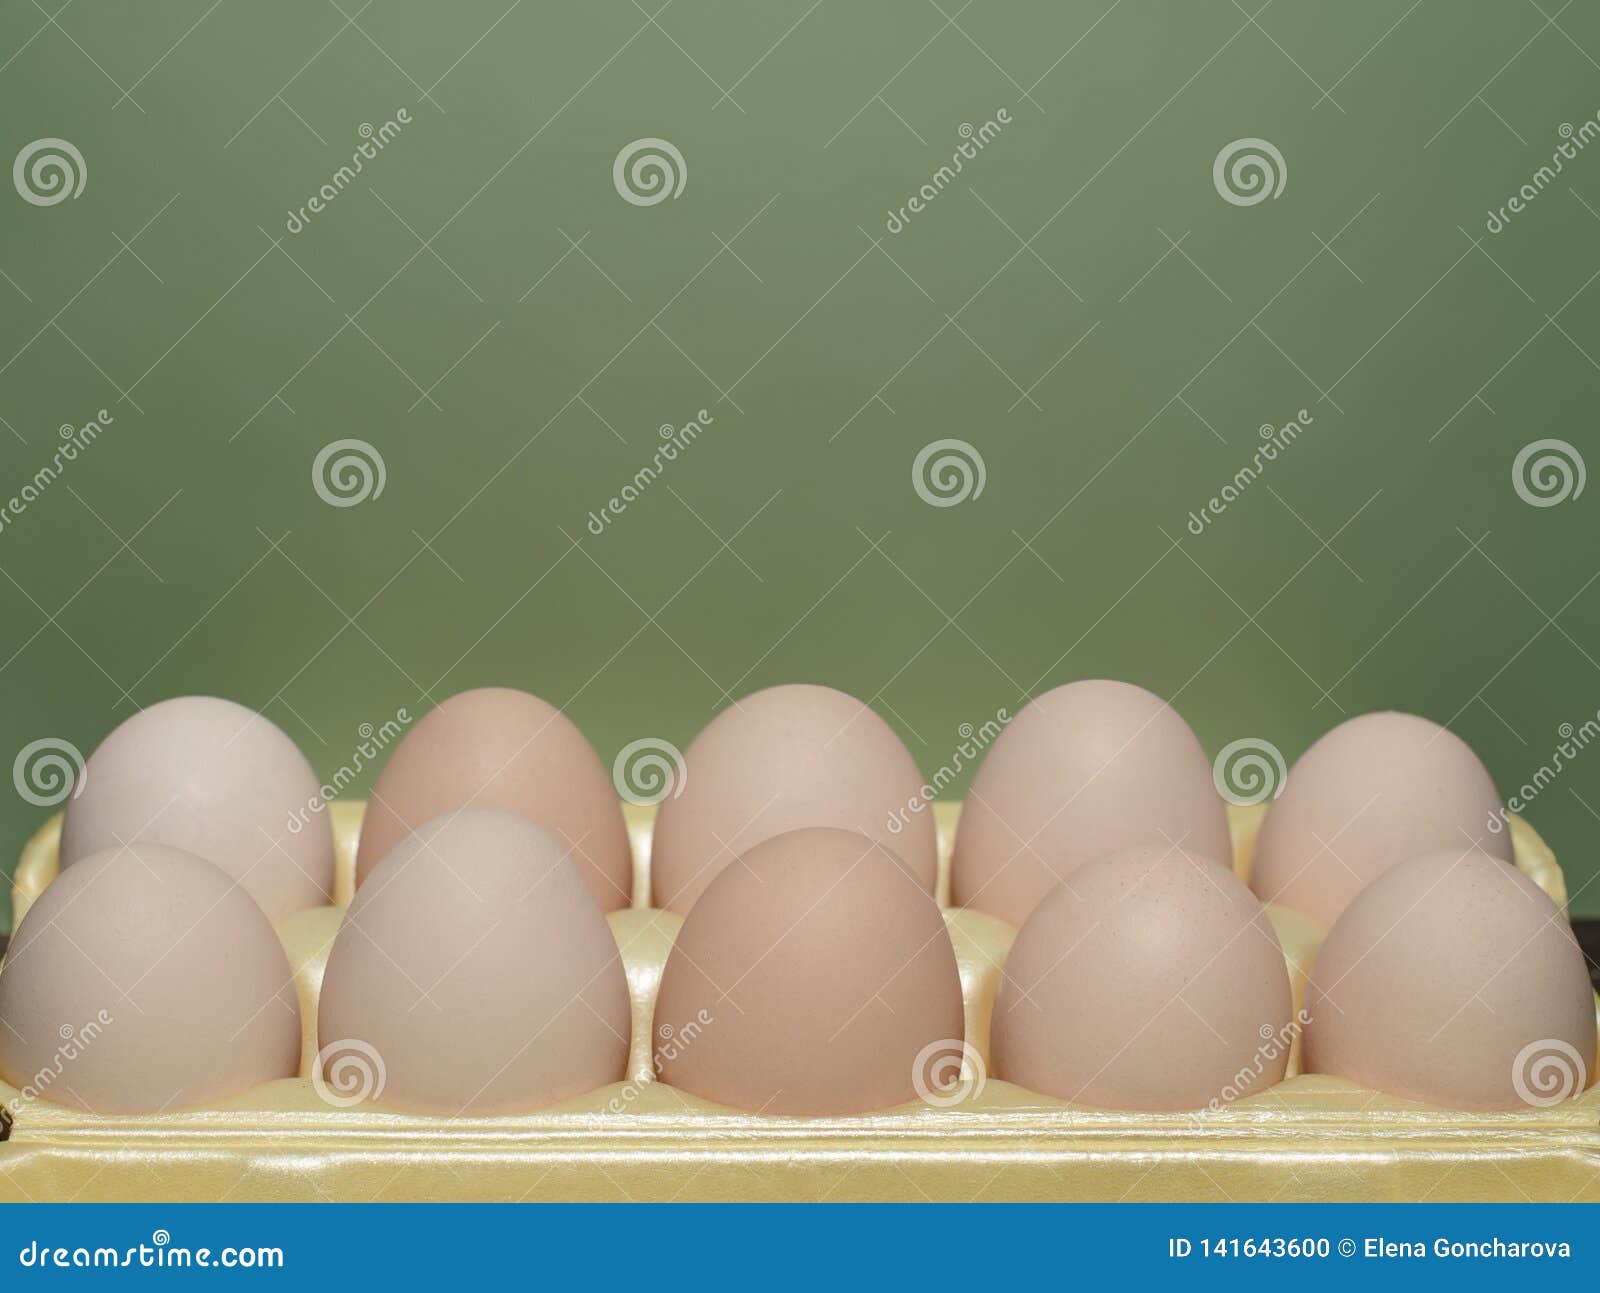 chicken eggs lie in a yellow plastic tray.